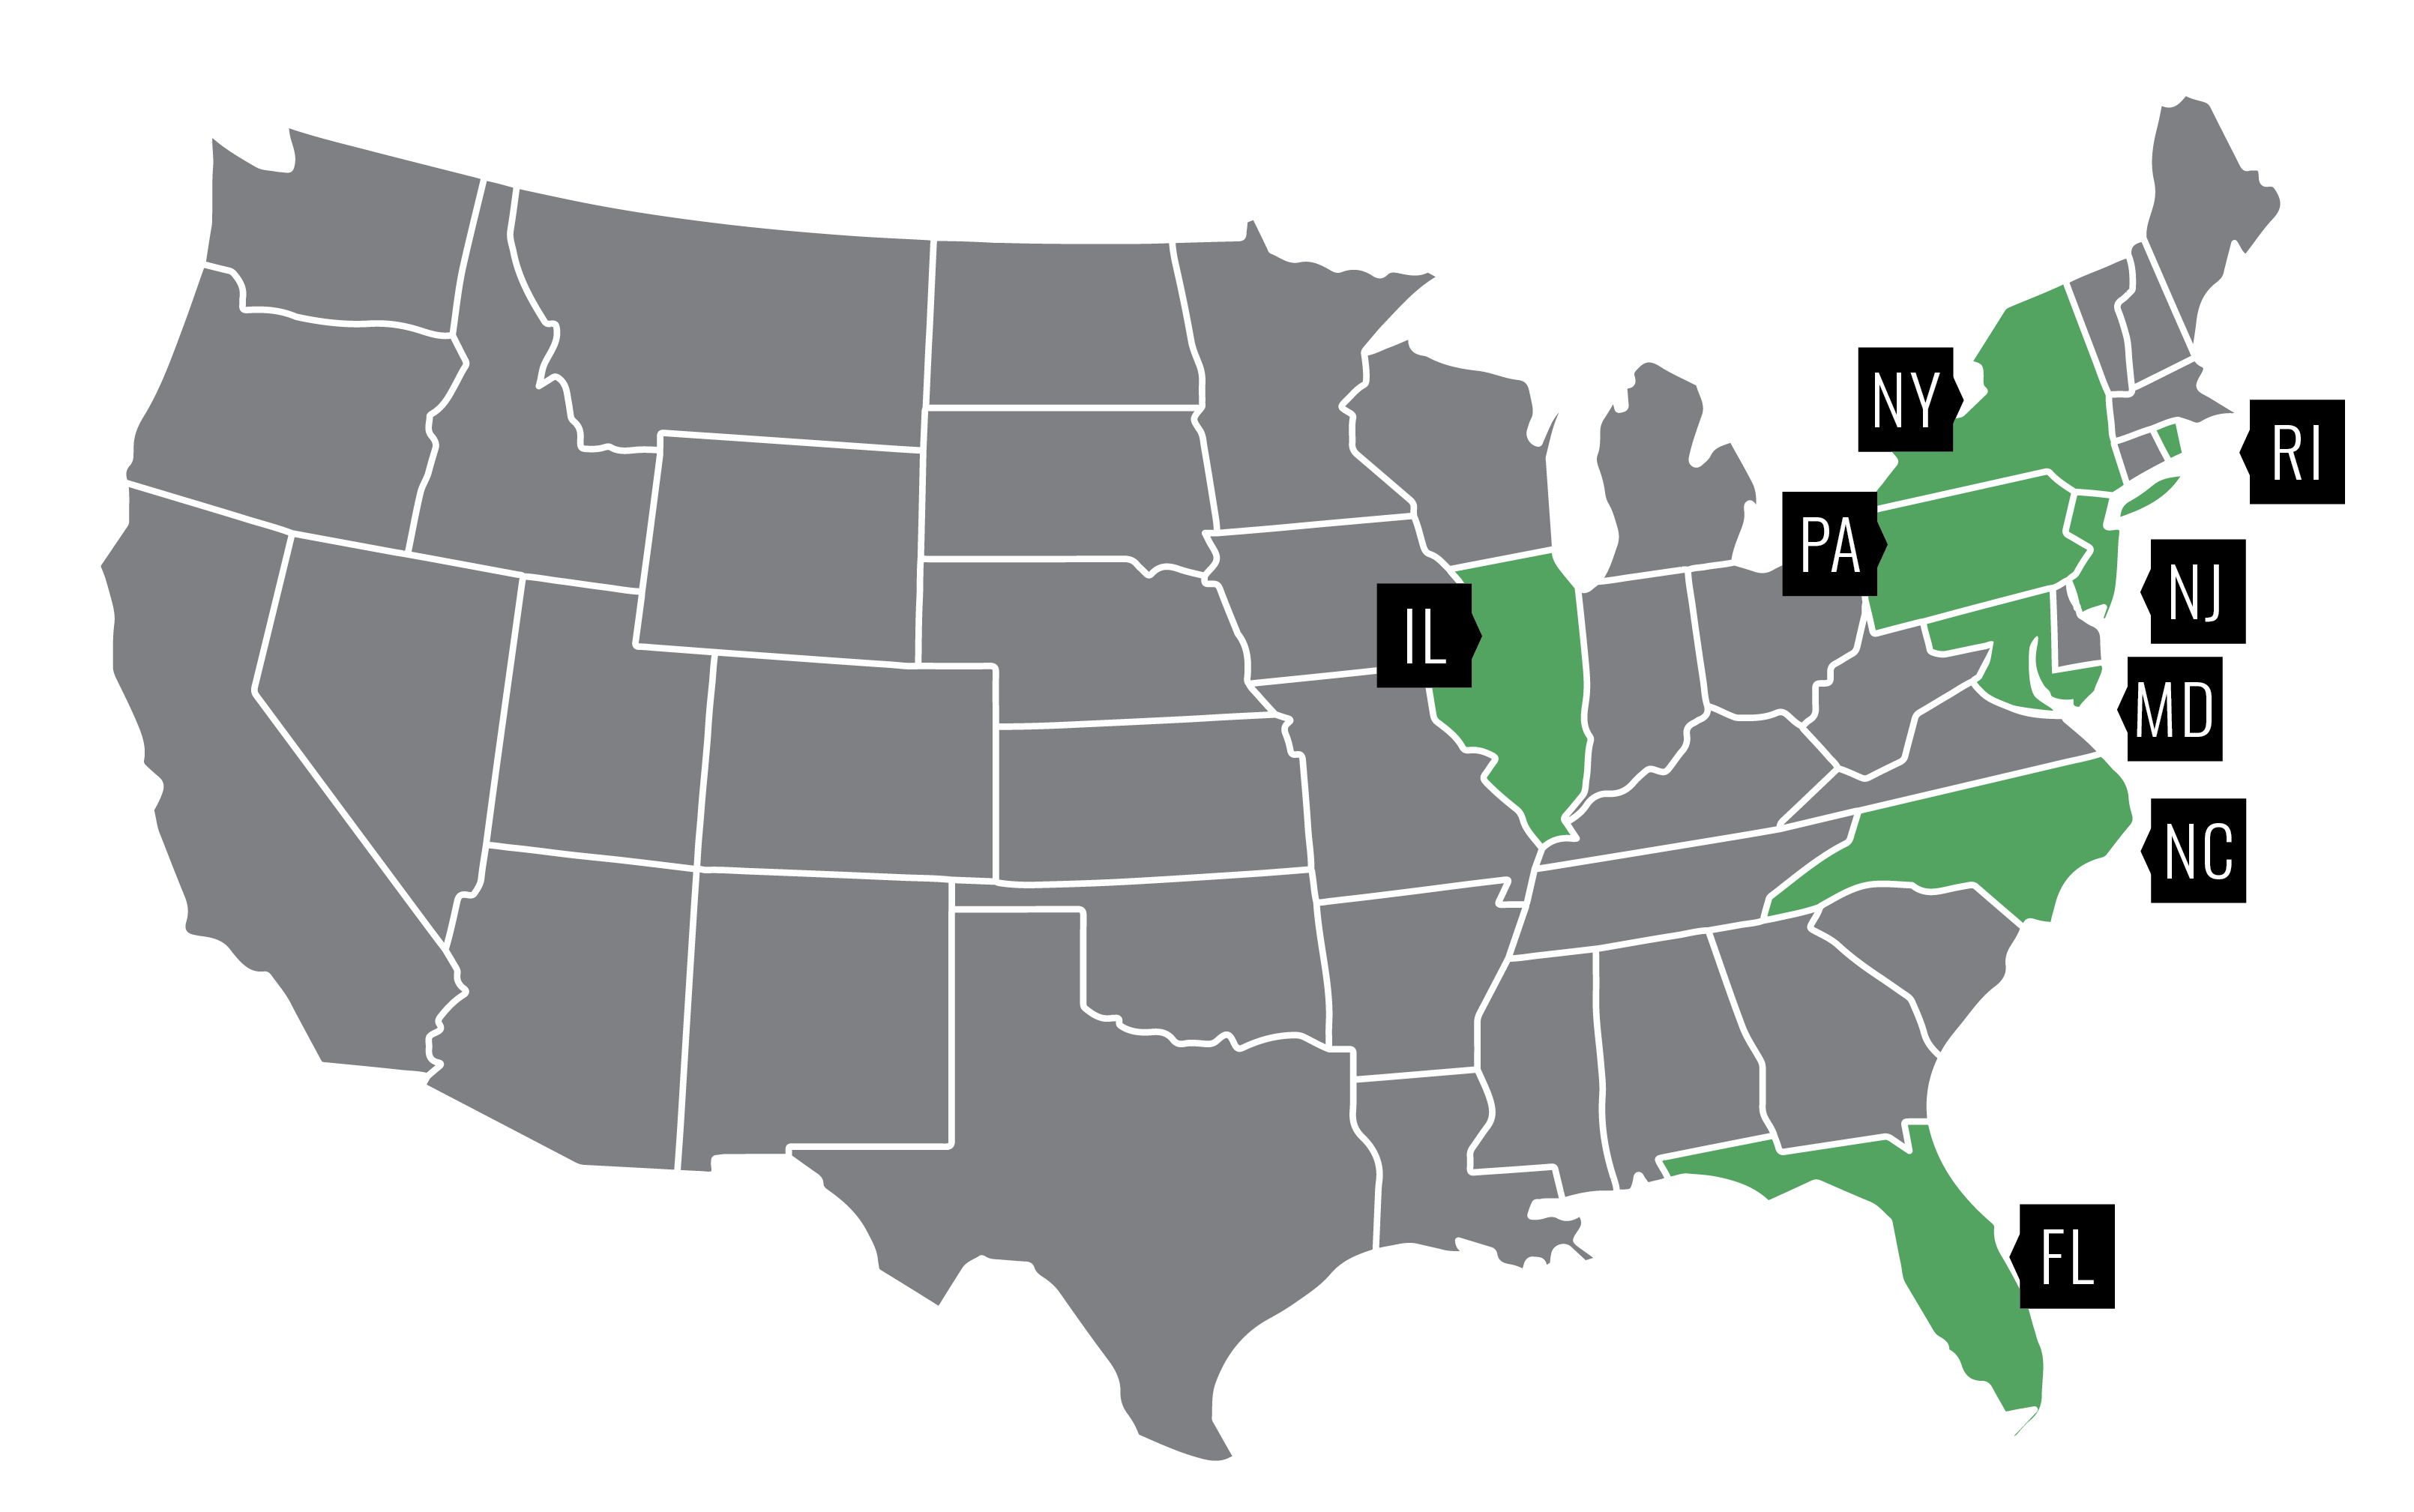 US Map with IL, PA, NY, RI, NJ, MD, NC, FL highlighted in green